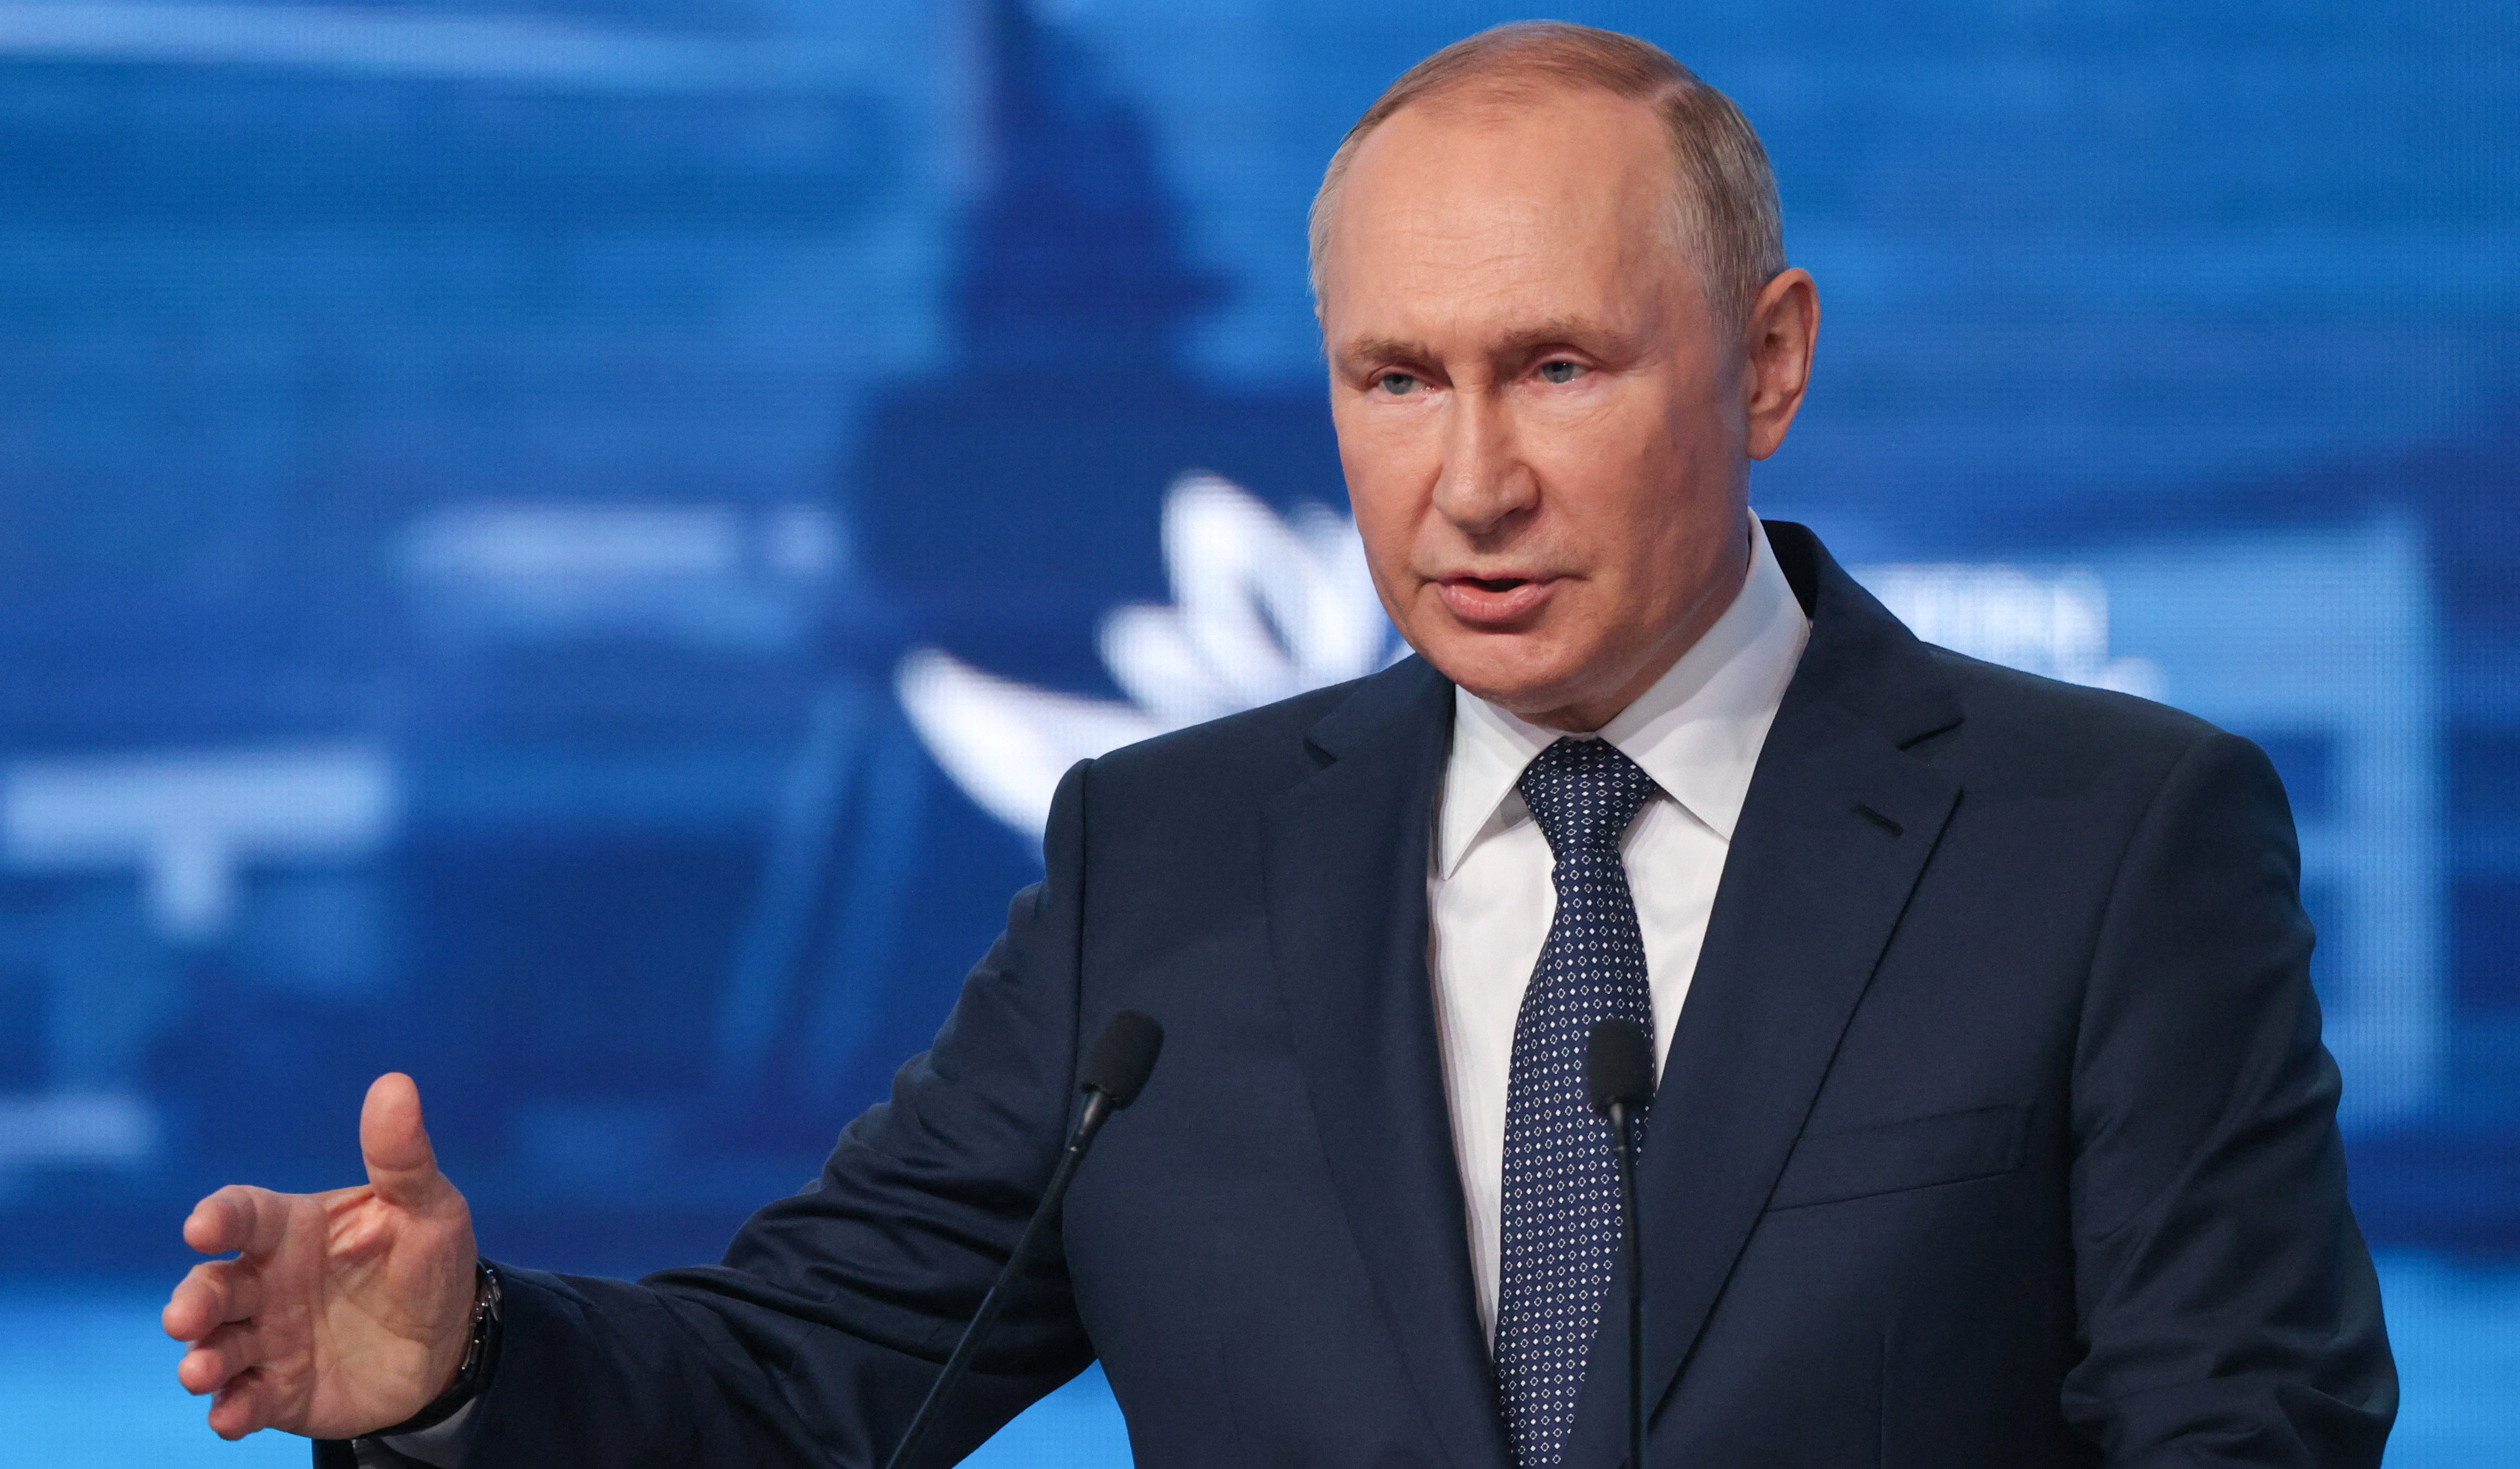 Putin says Russia has not lost anything over actions in Ukraine